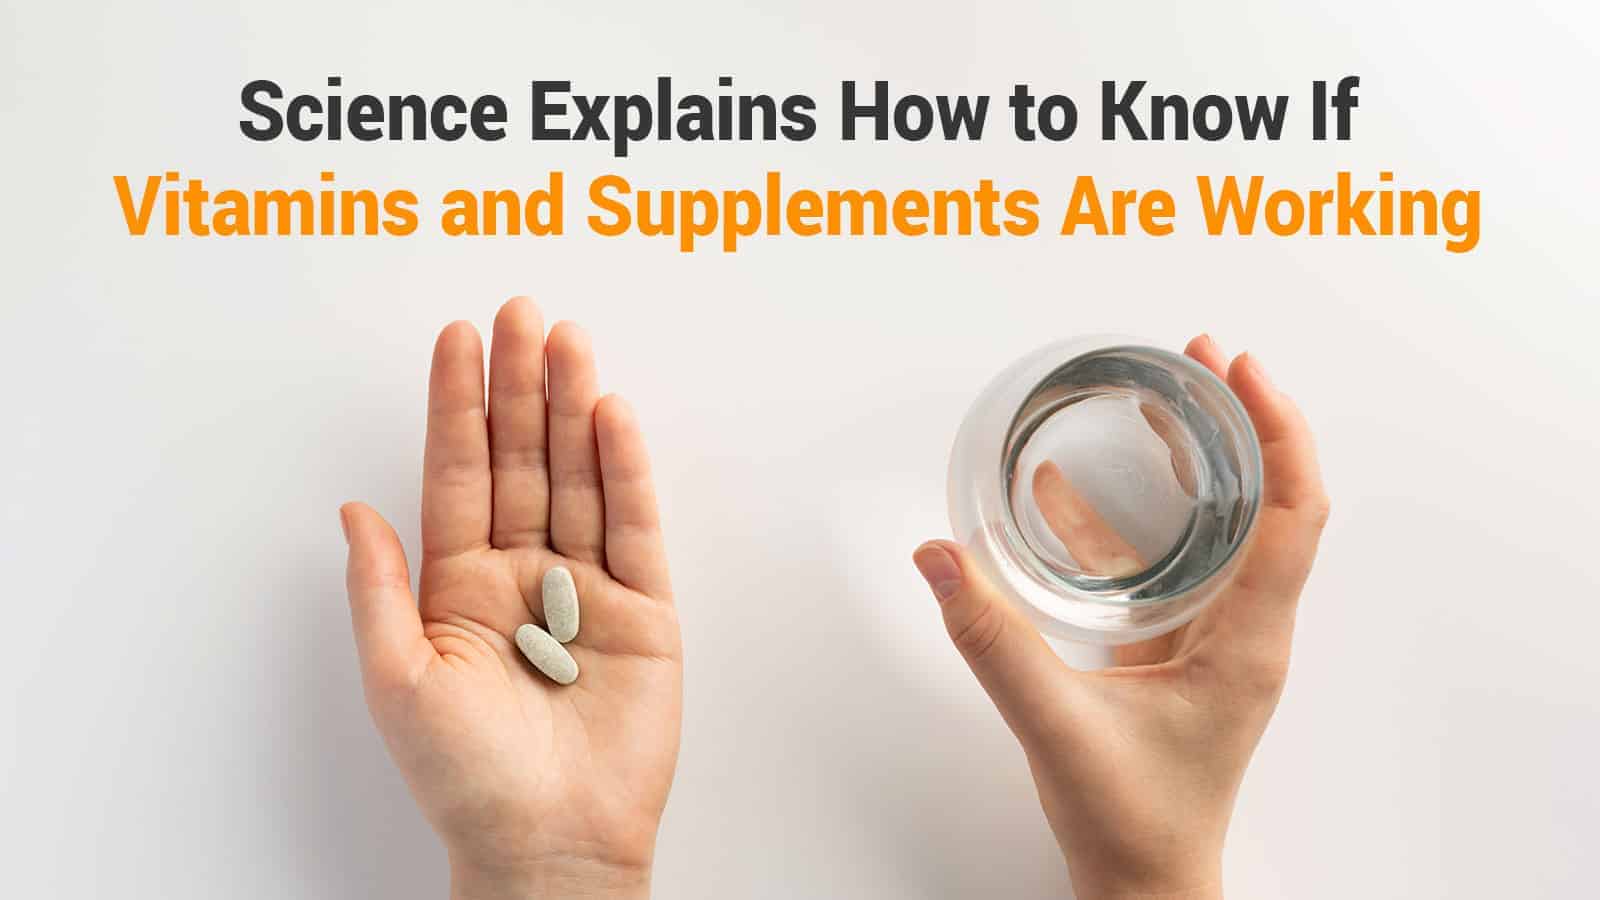 Science Explains How to Know If Vitamins and Supplements Are Working